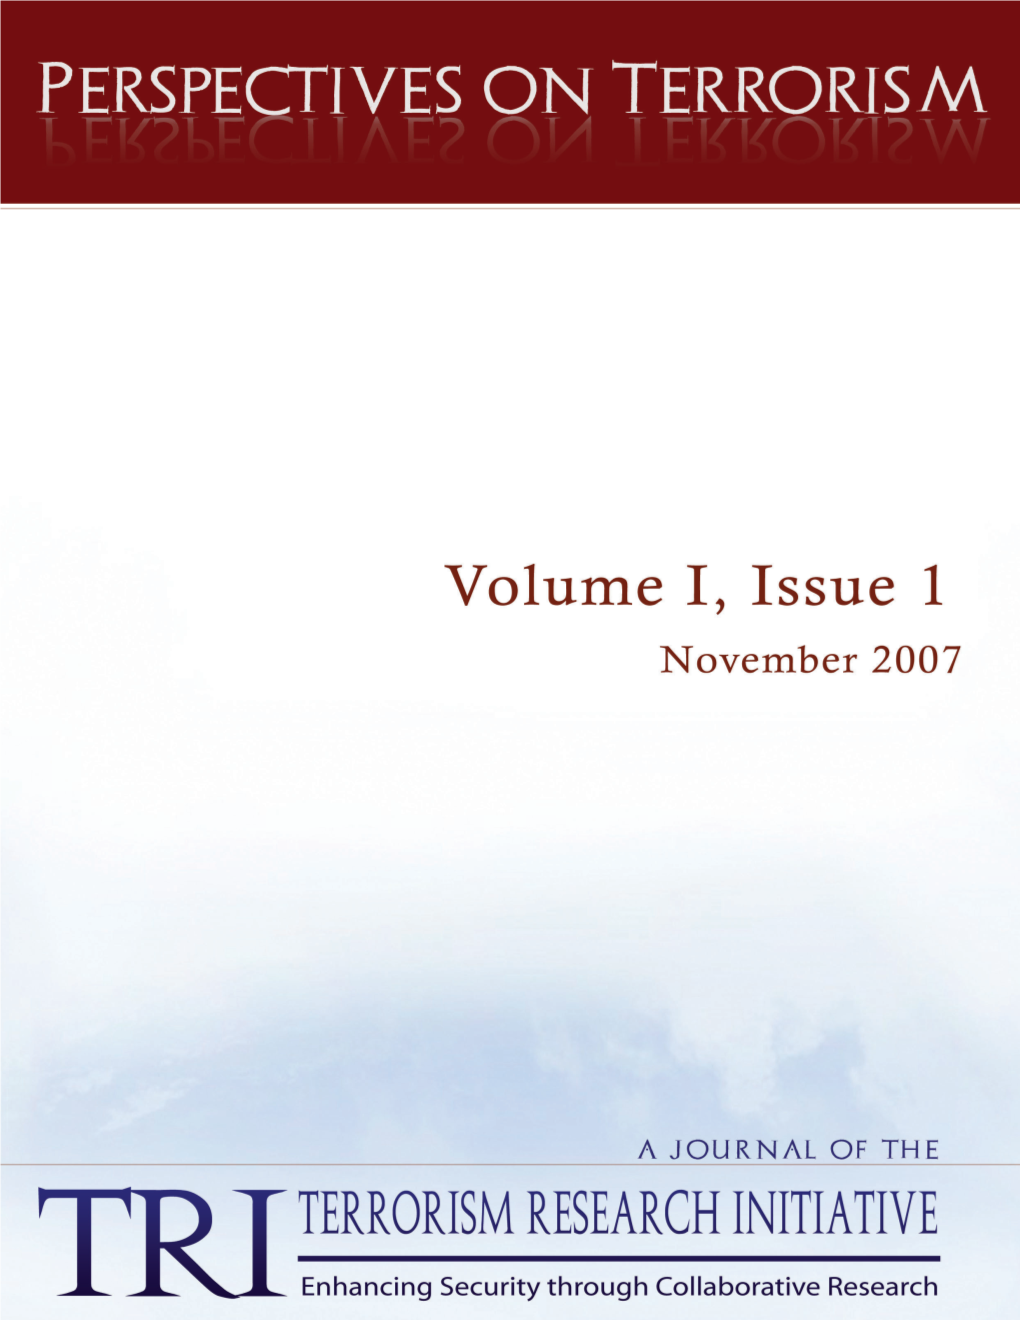 Perspectives on Terrorism, Volume 1, Issue 1